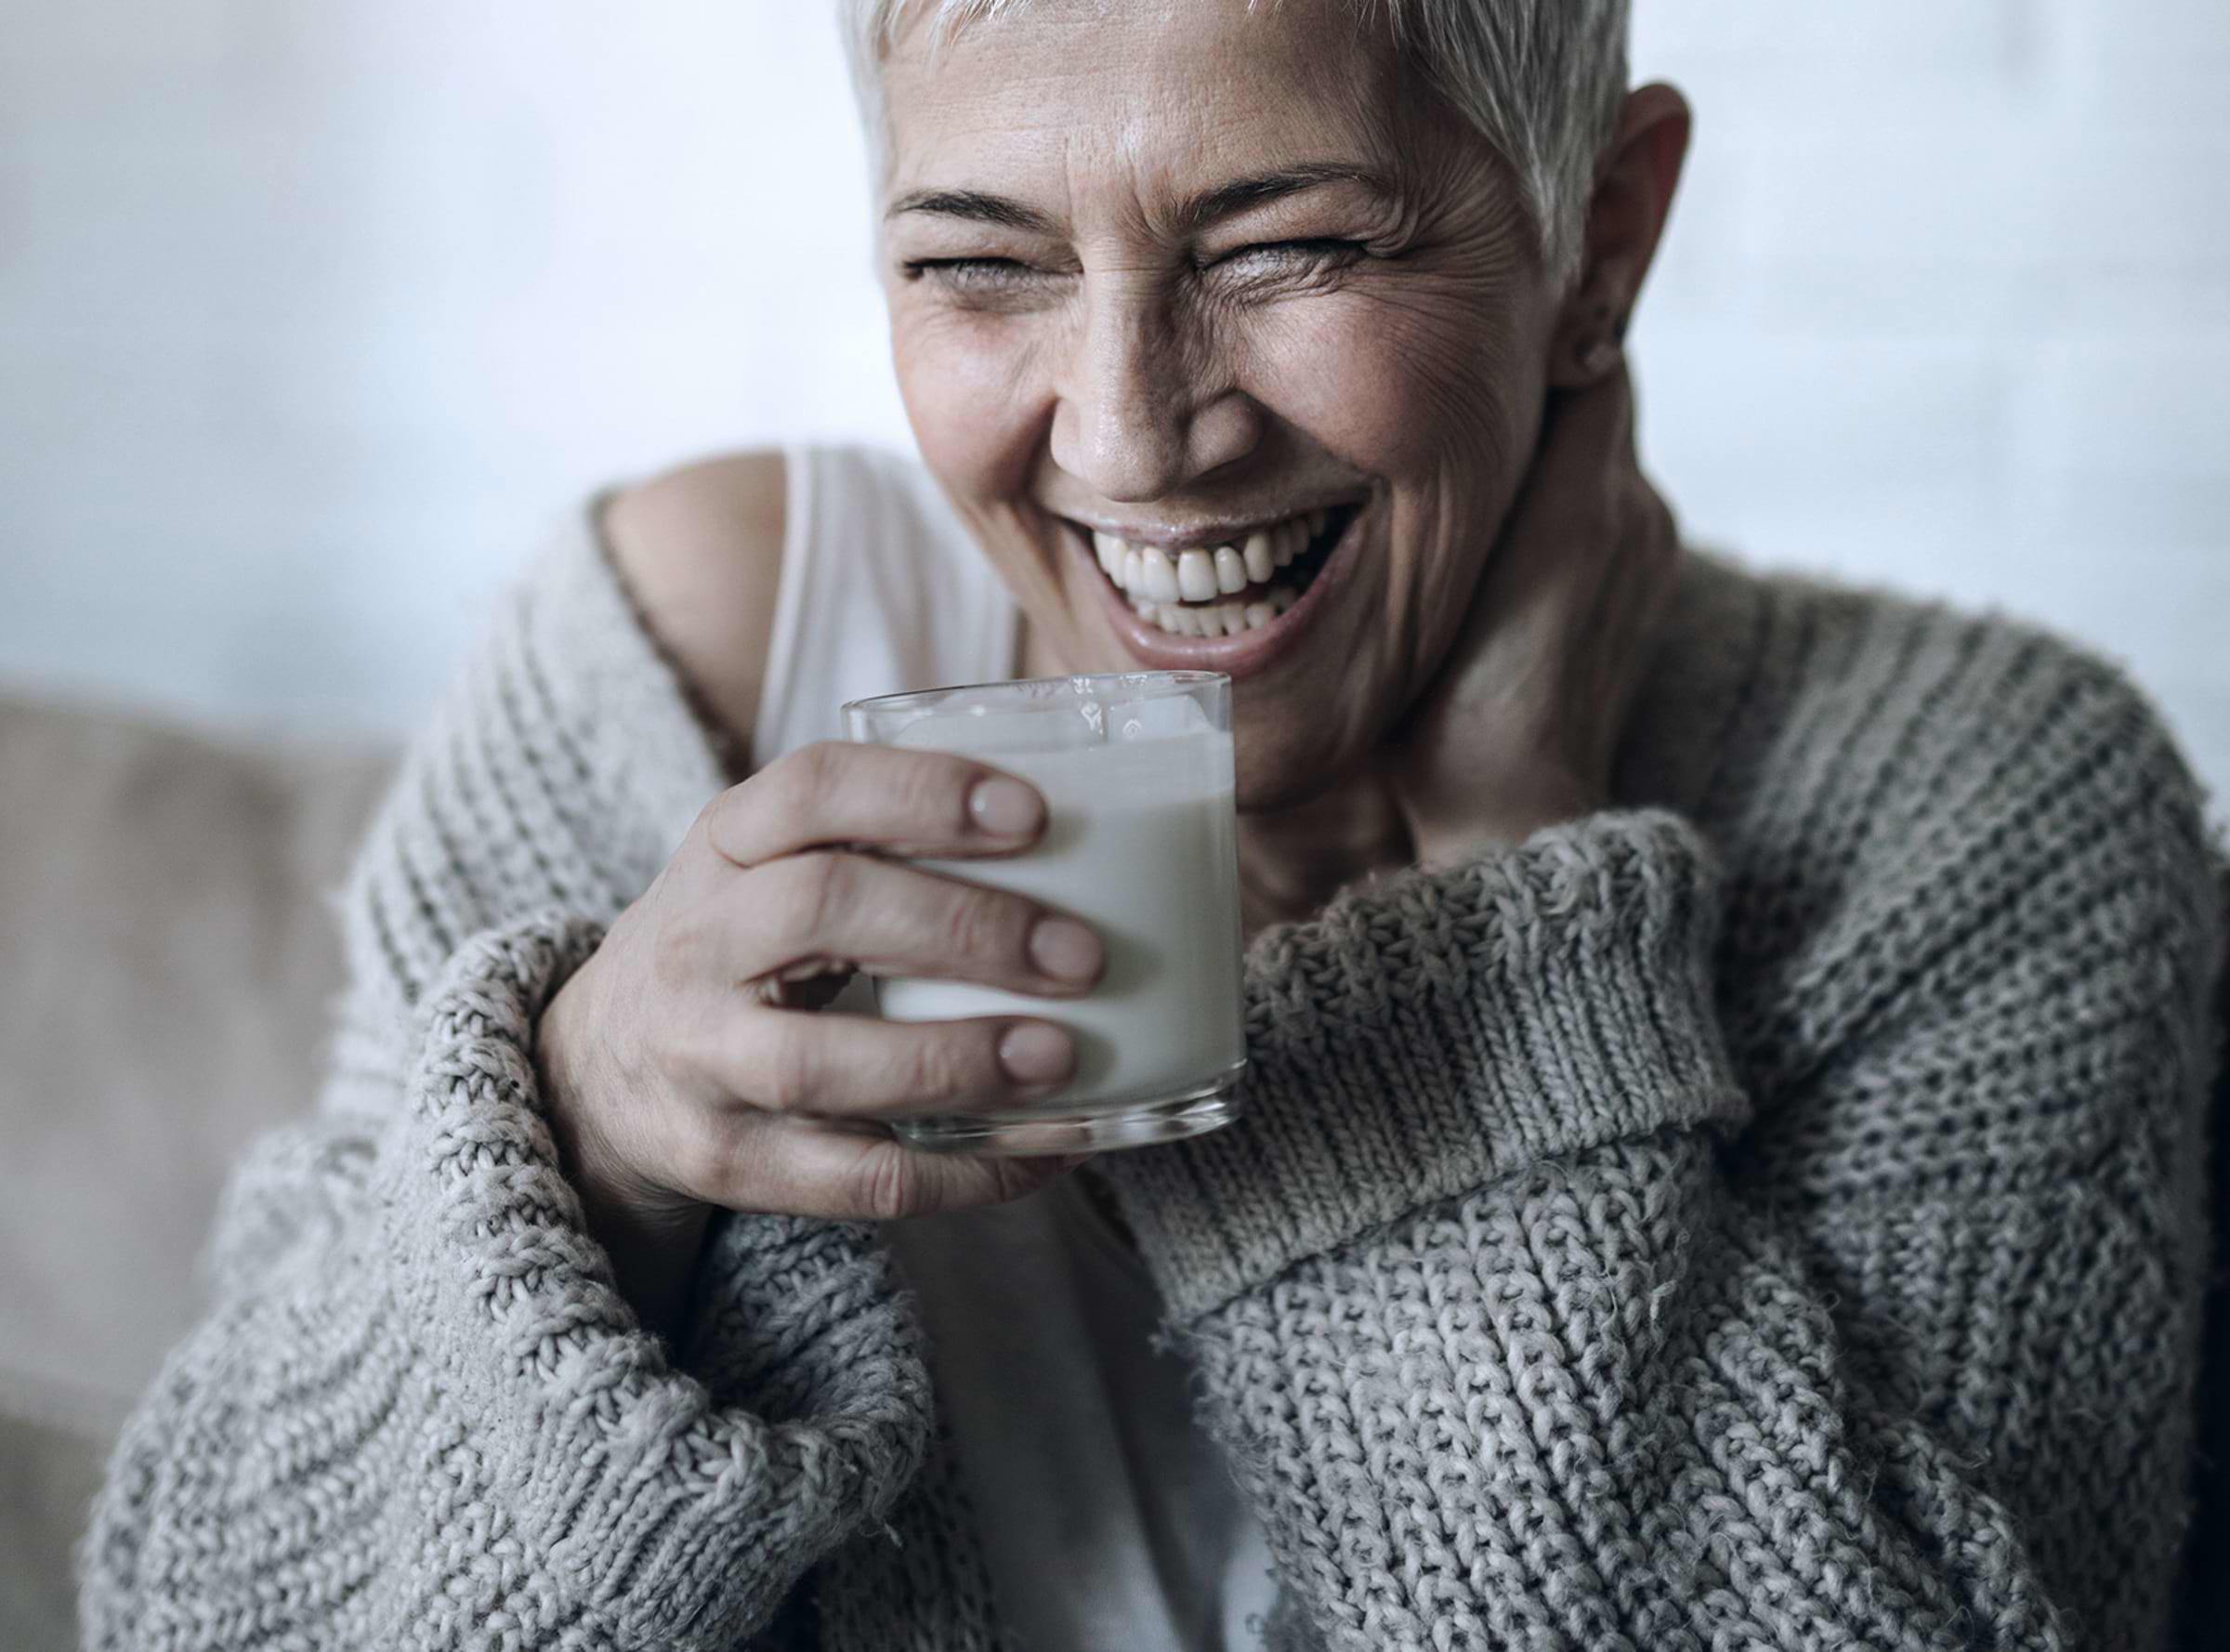 A woman laughing with a glass of milk in her hand